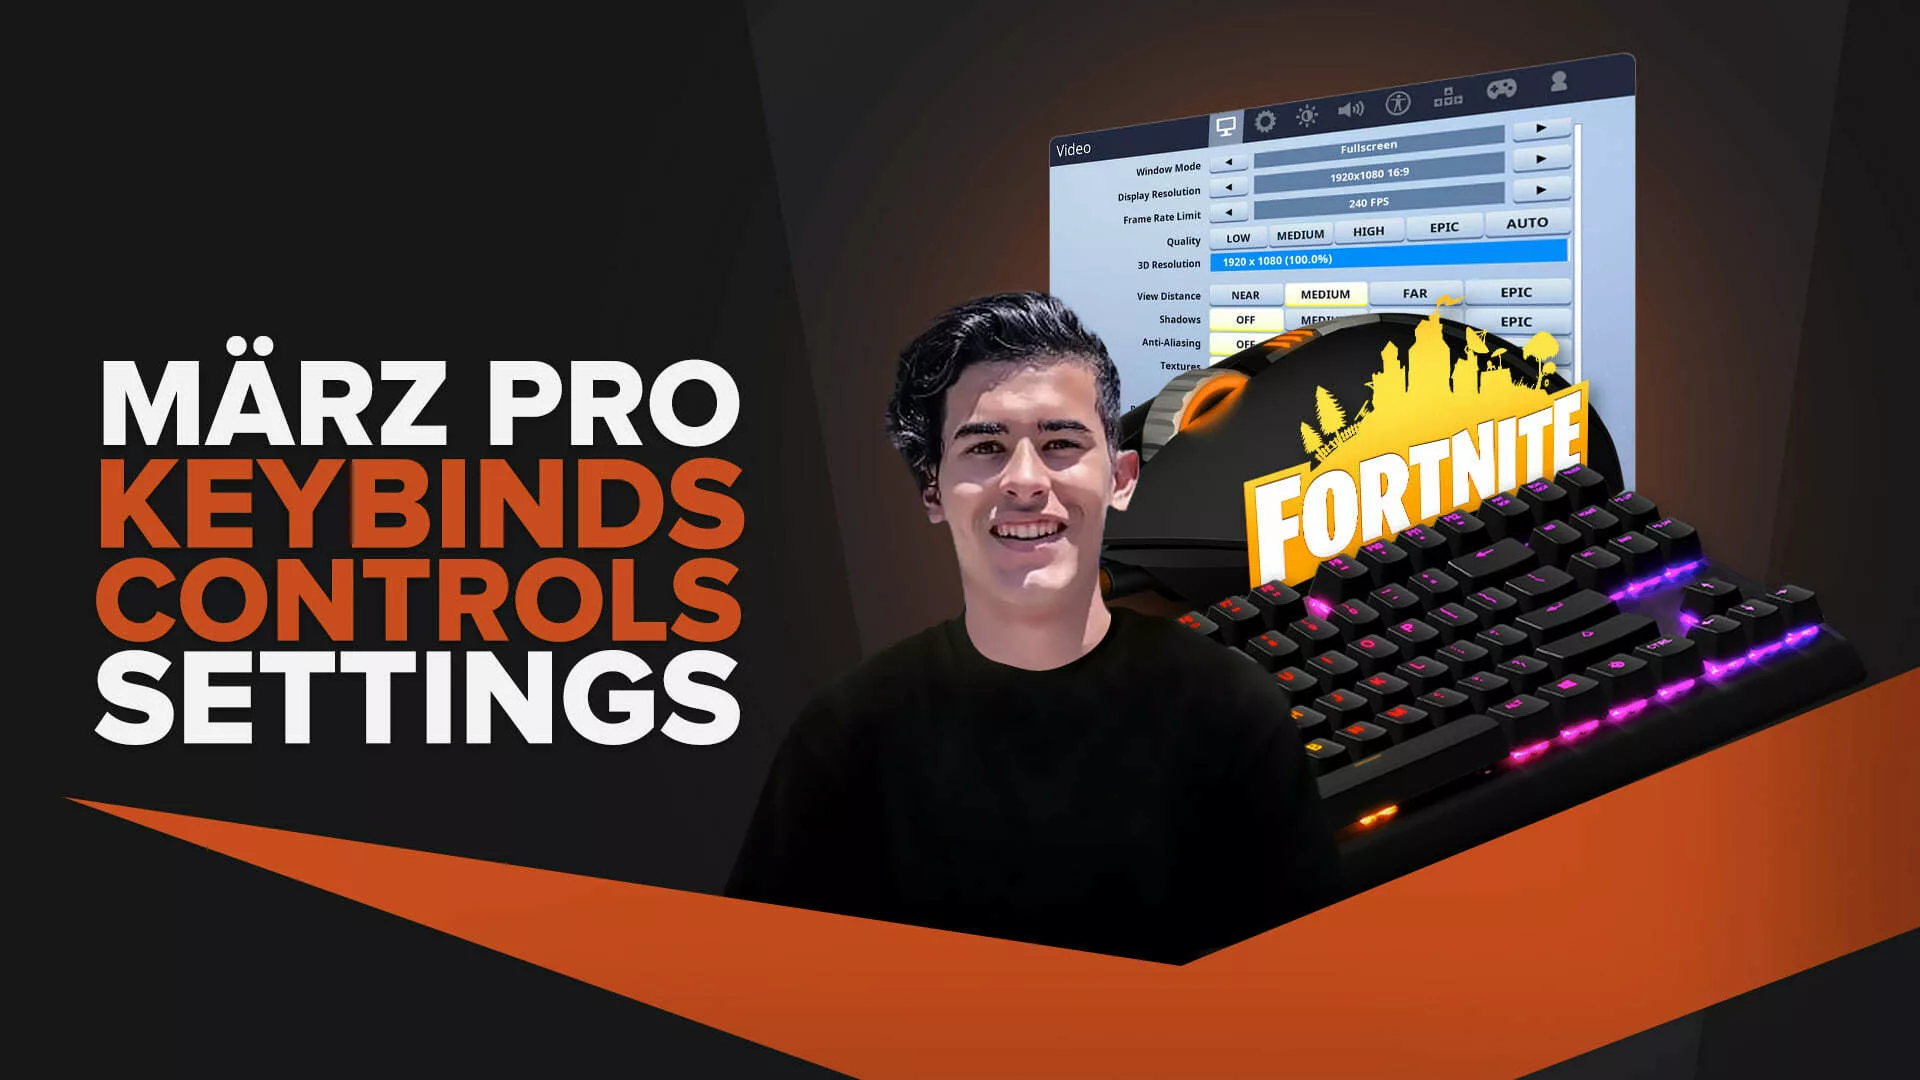 Marz's | Keybinds, Mouse, Video Pro Fornite Settings